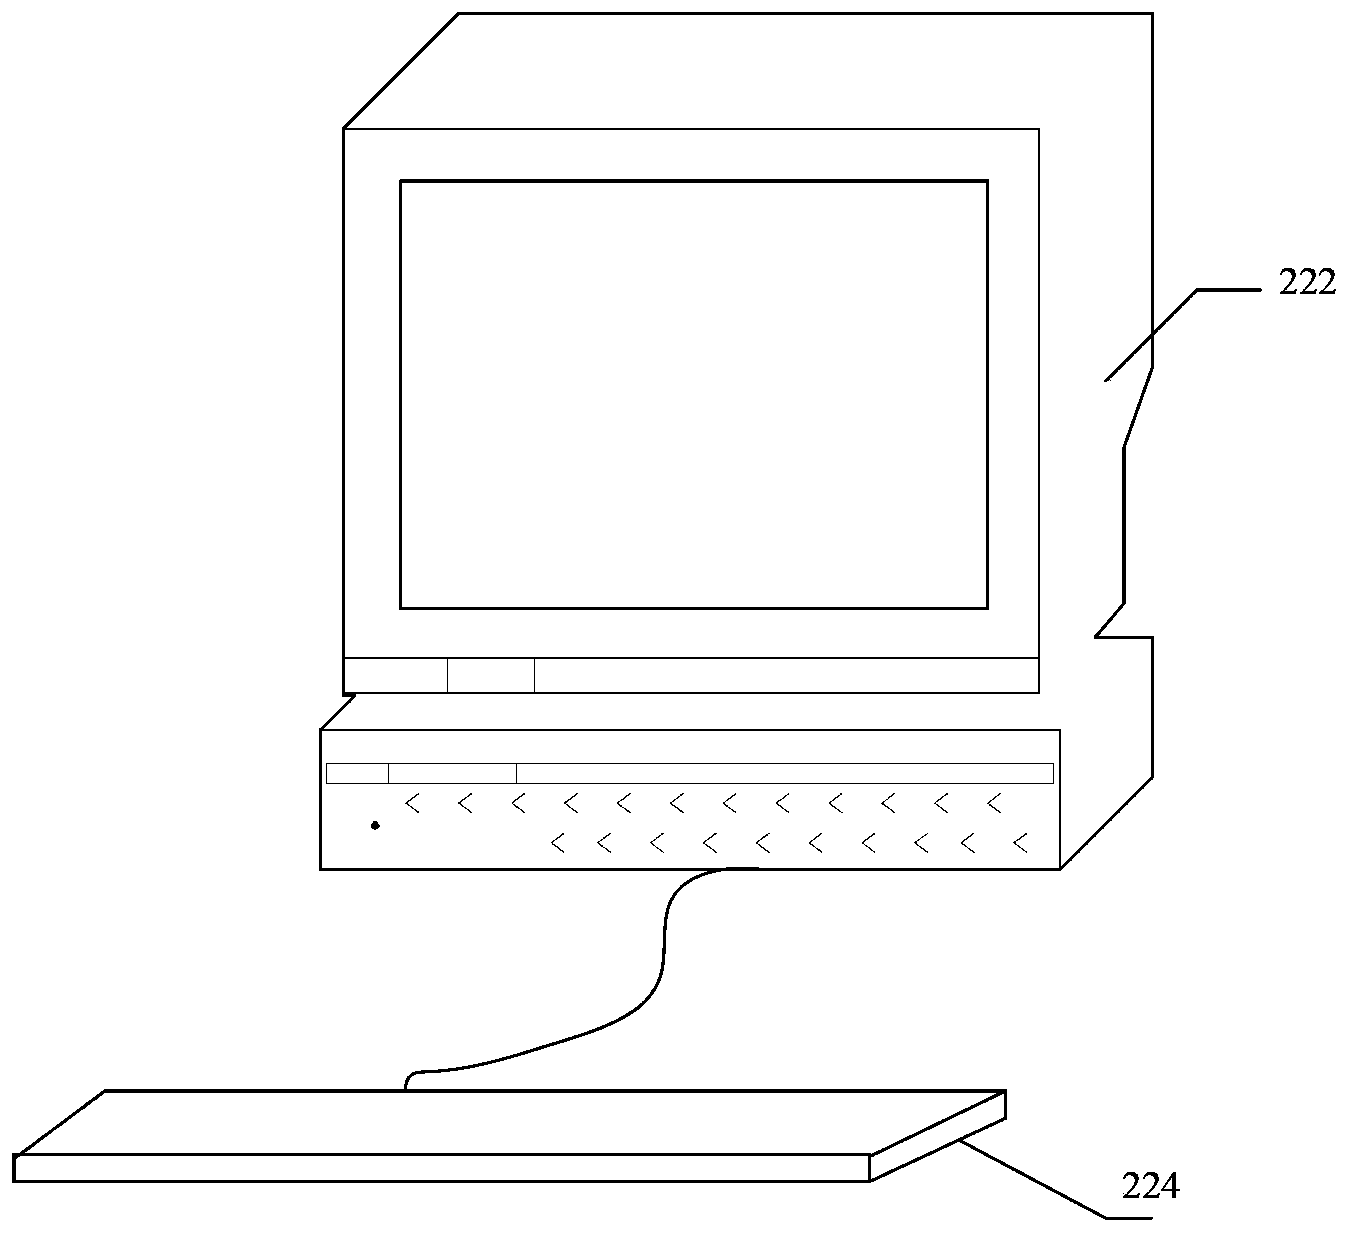 Terminal and page-turning method